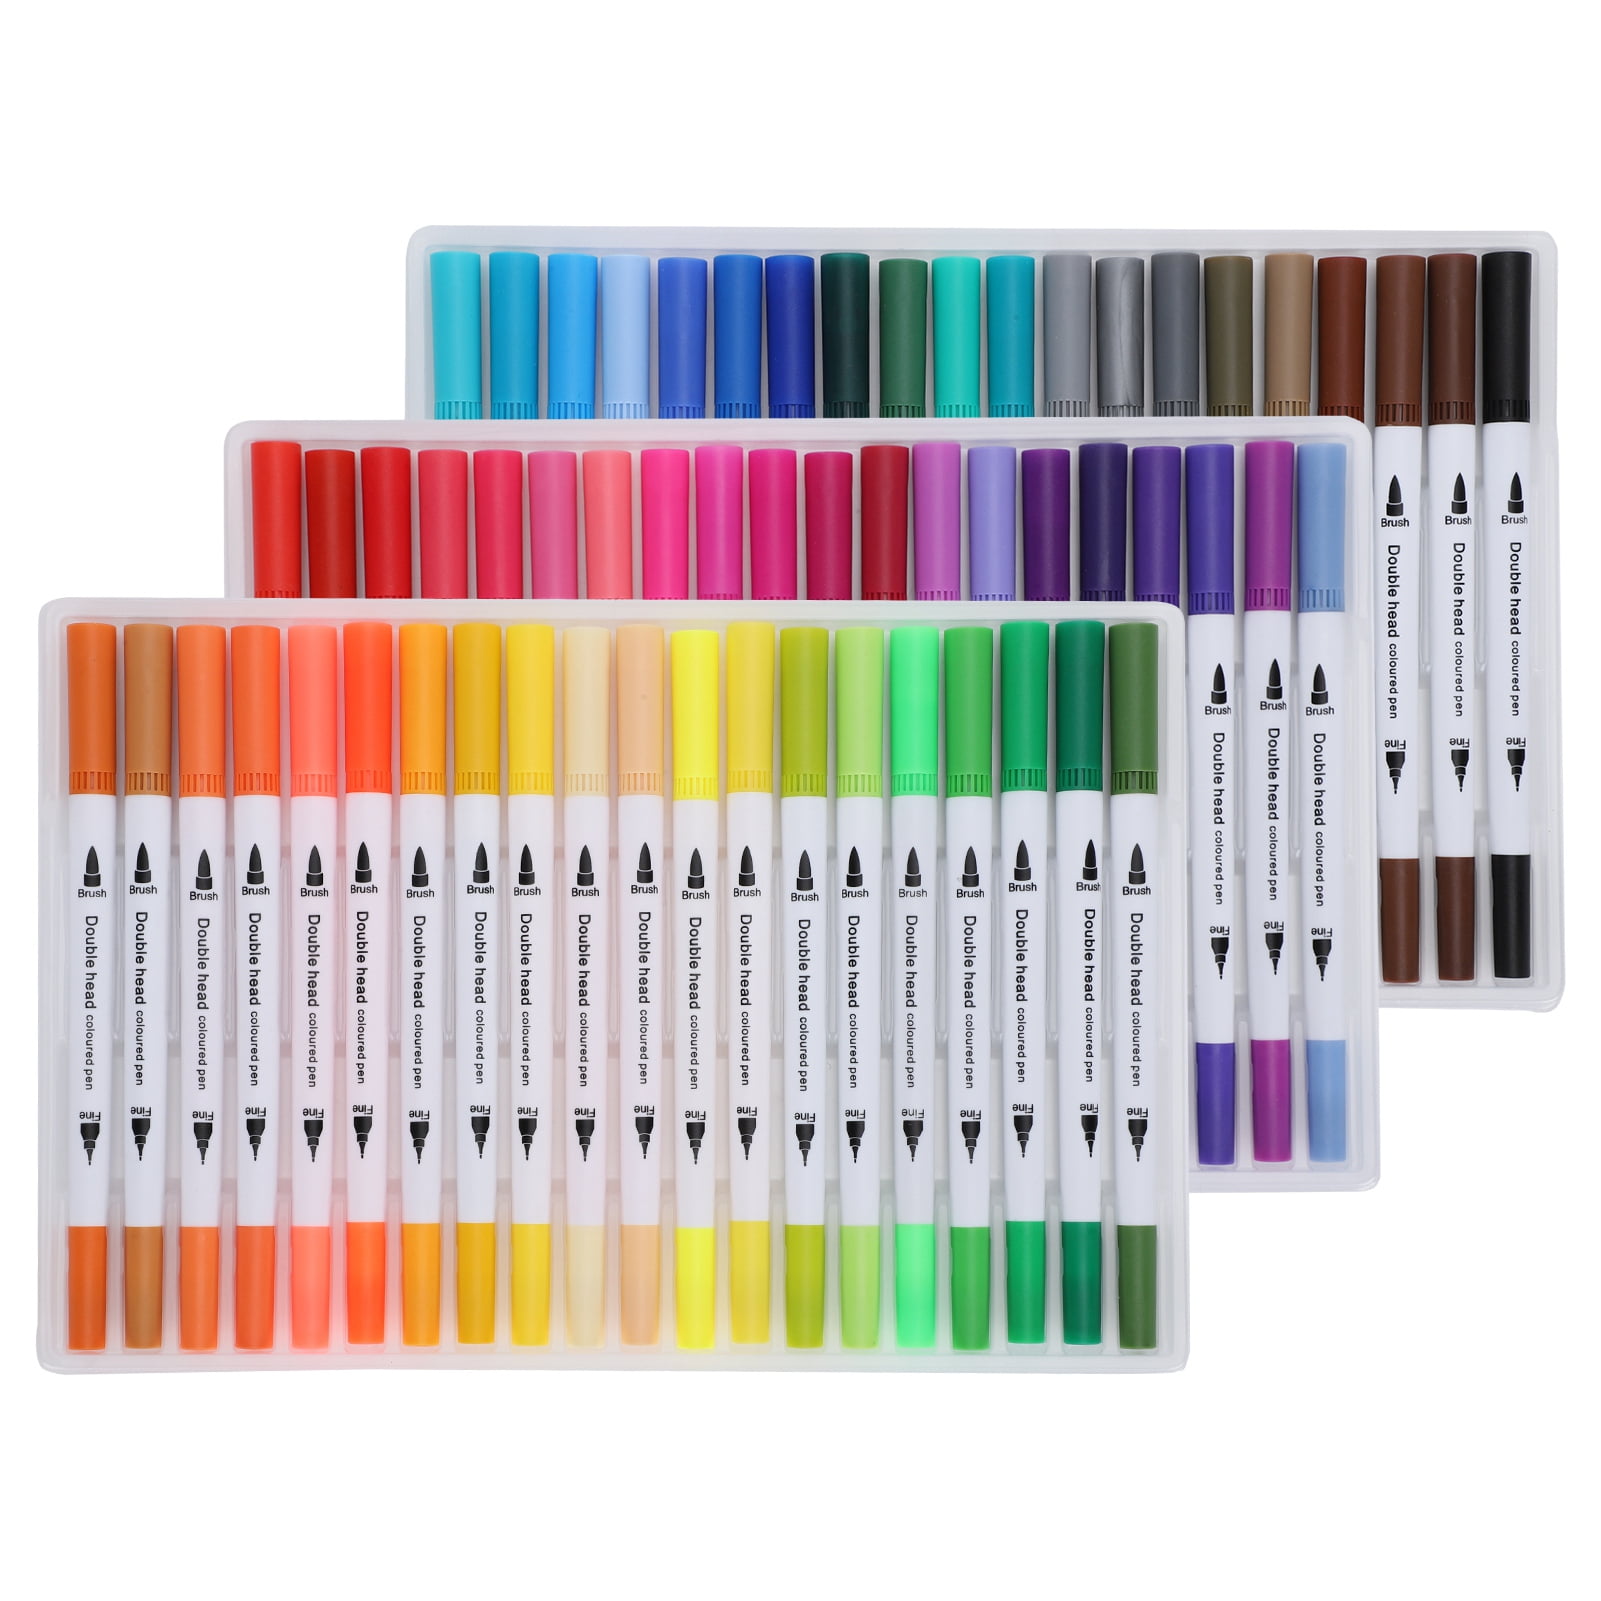 60x COLOUR FINE TIP FELT PENS Therapy Colouring Drawing Markers School Art Craft 